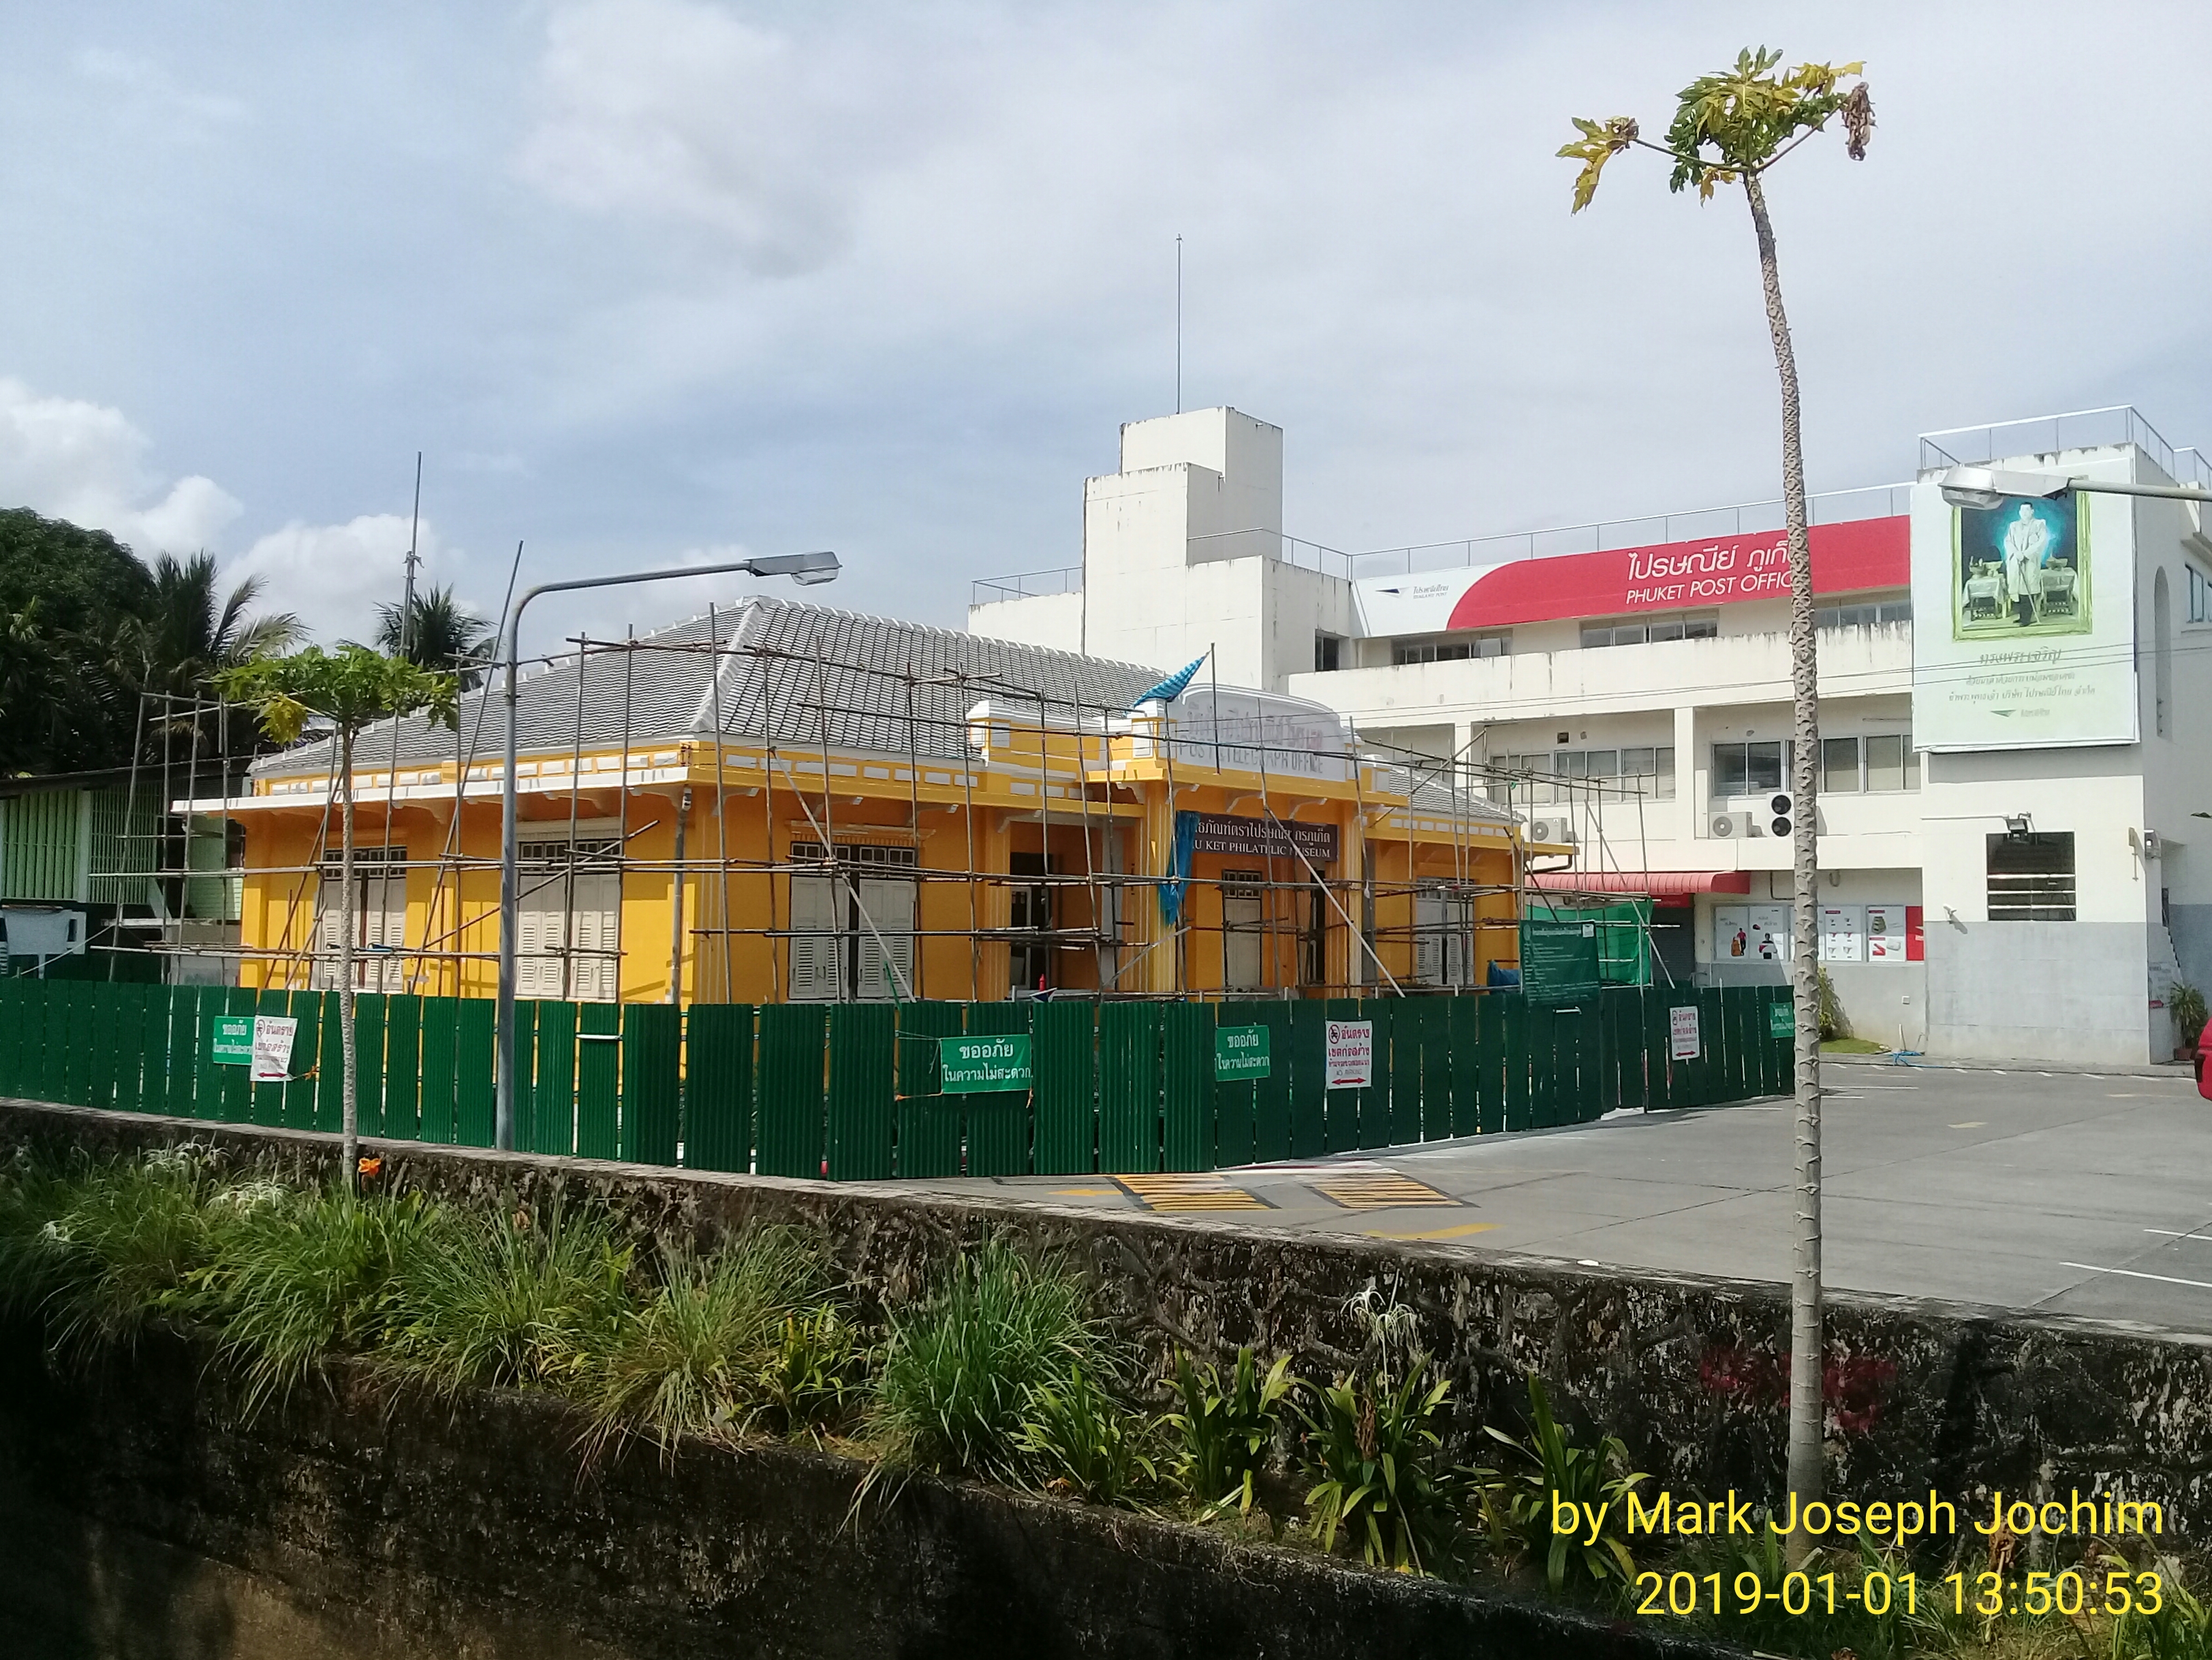 The Phuket Philatelic Museum (original provincial post office) undergoing renovations after a roof collapse in mid-2018, and the 